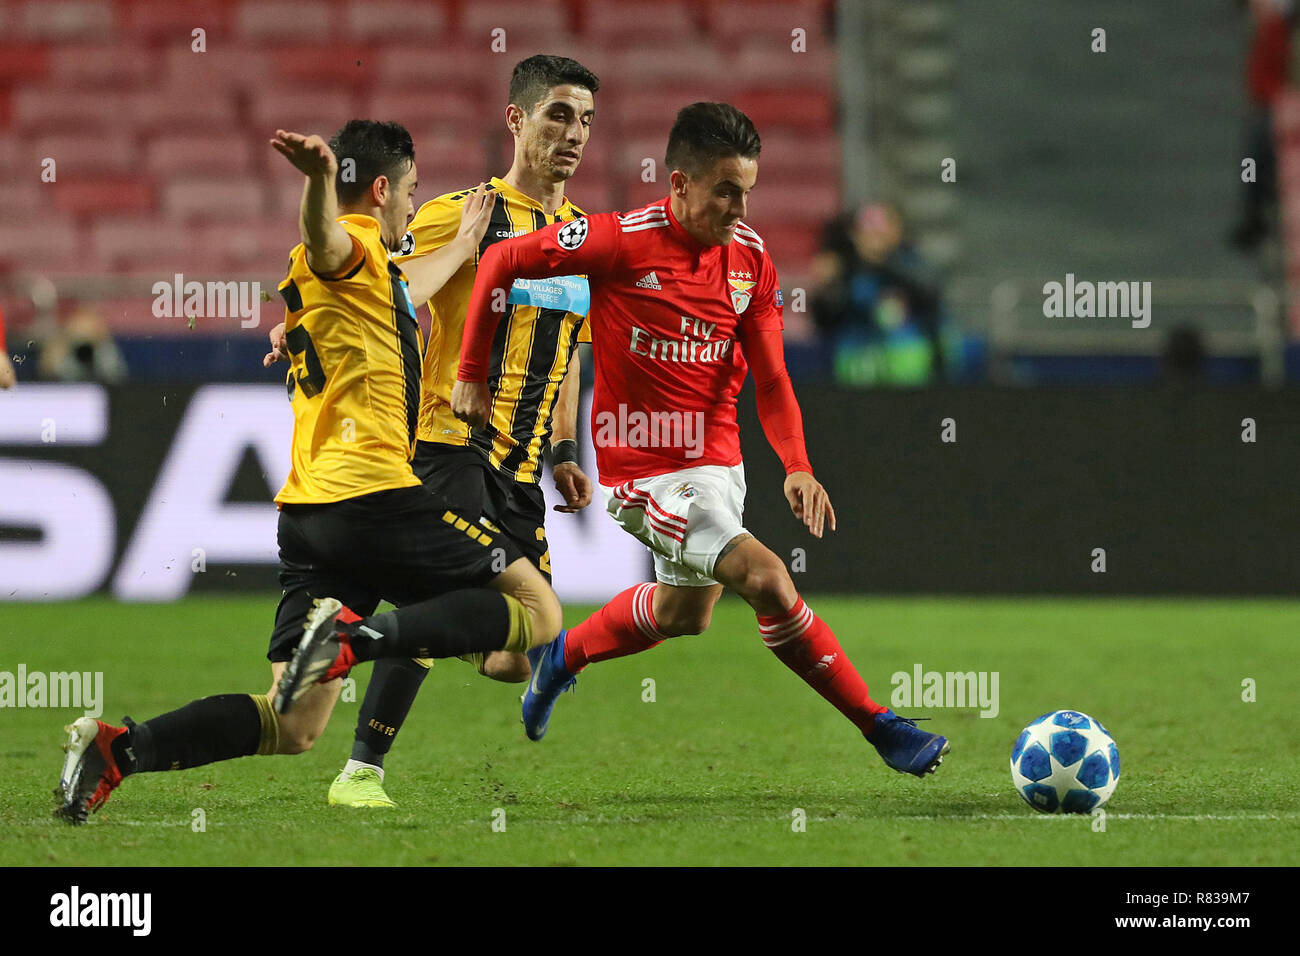 Lisbon, Portugal. 12th Dec, 2018. Franco Cervi of SL Benfica in action during the UEFA Champions League 2018/19 football match between SL Benfica vs AEK Athens F.C. Credit: David Martins/SOPA Images/ZUMA Wire/Alamy Live News Stock Photo